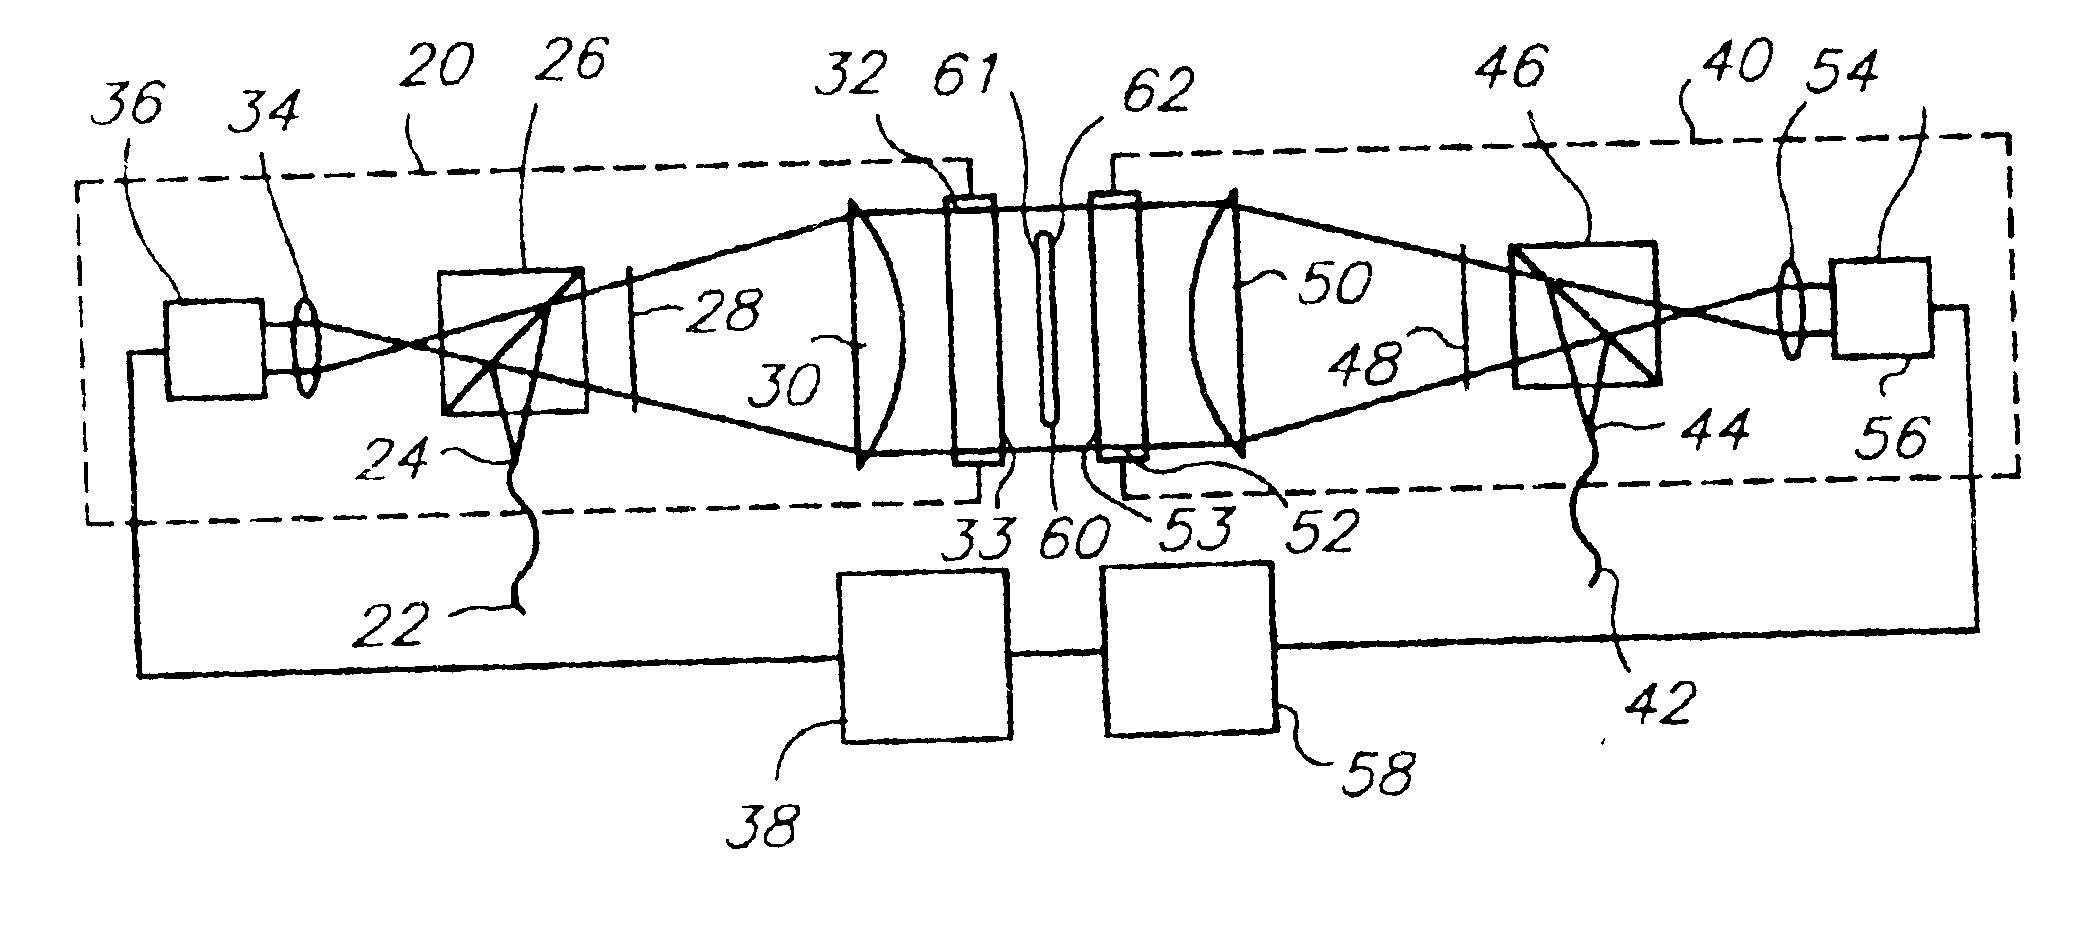 Method and apparatus for measuring the shape and thickness variation of polished opaque plates